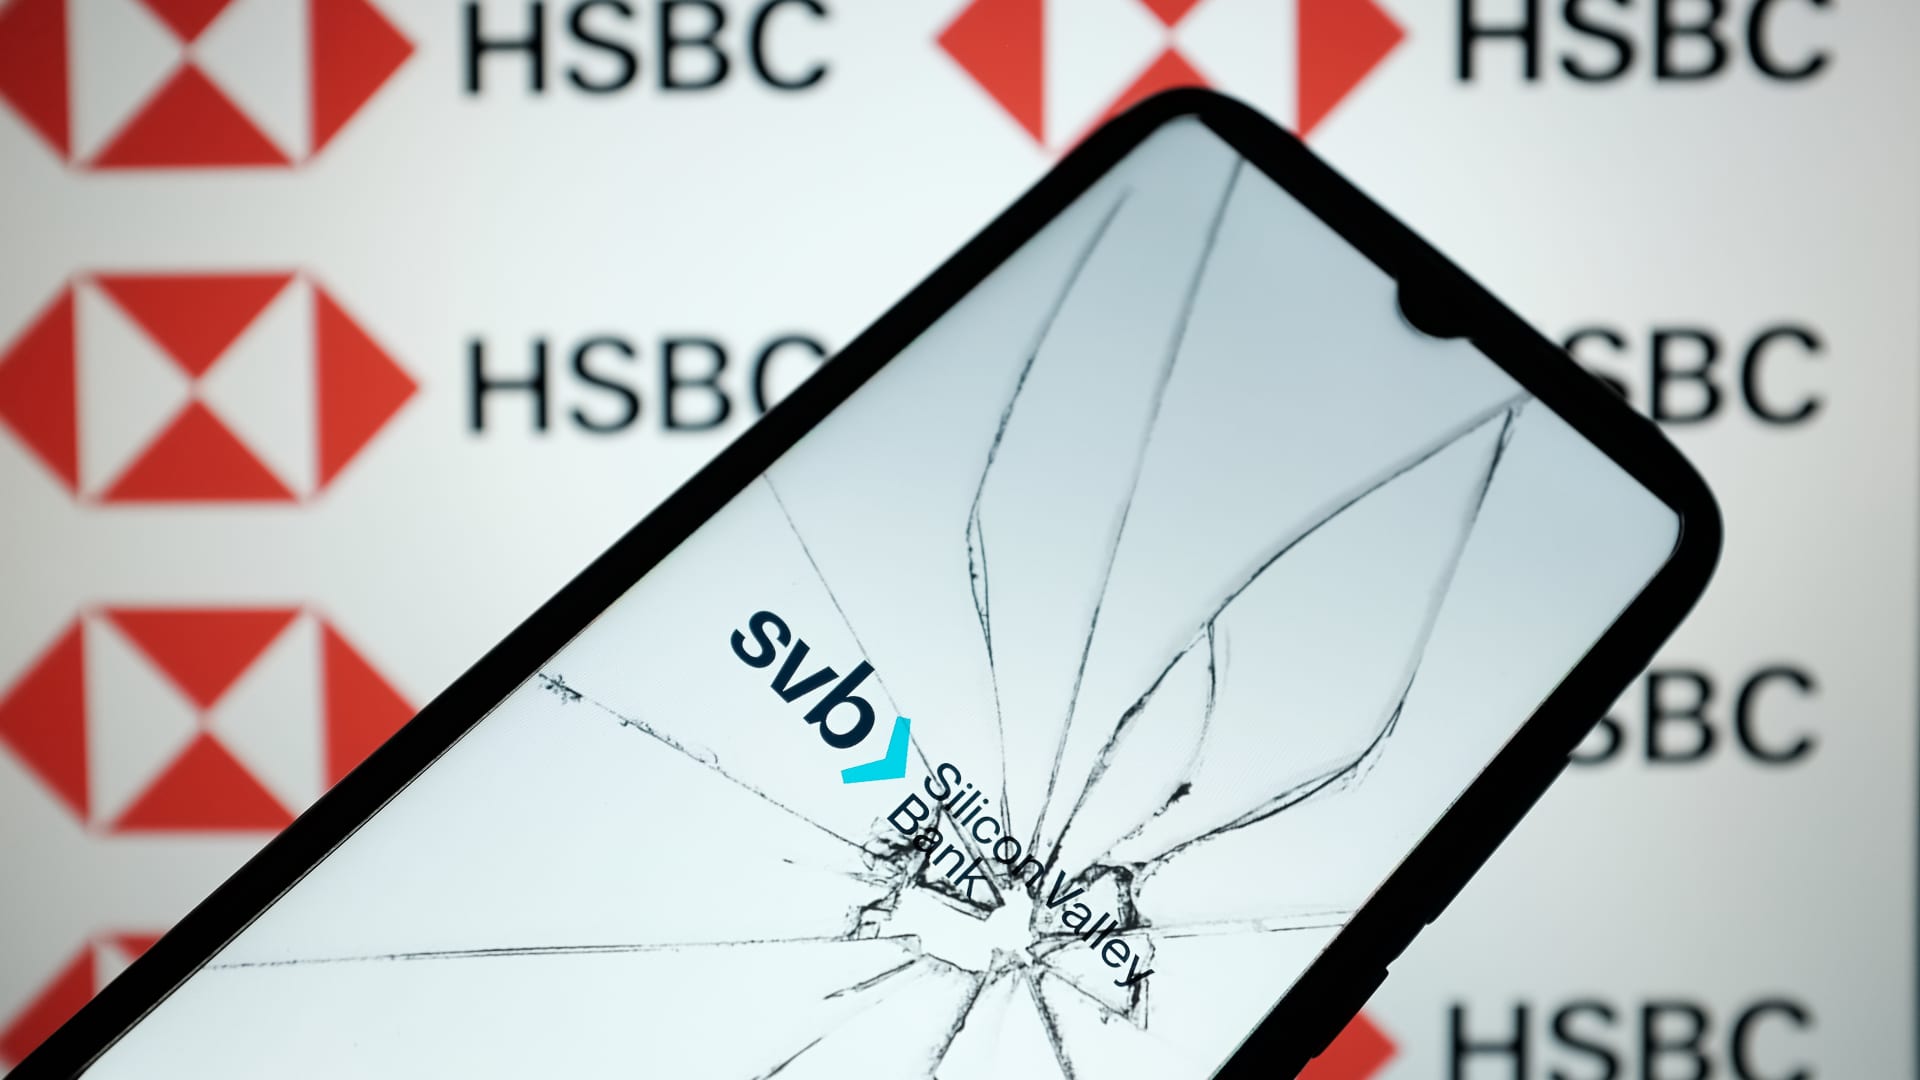 HSBC bought Silicon Valley Bank UK in record time — here's how events unfolded